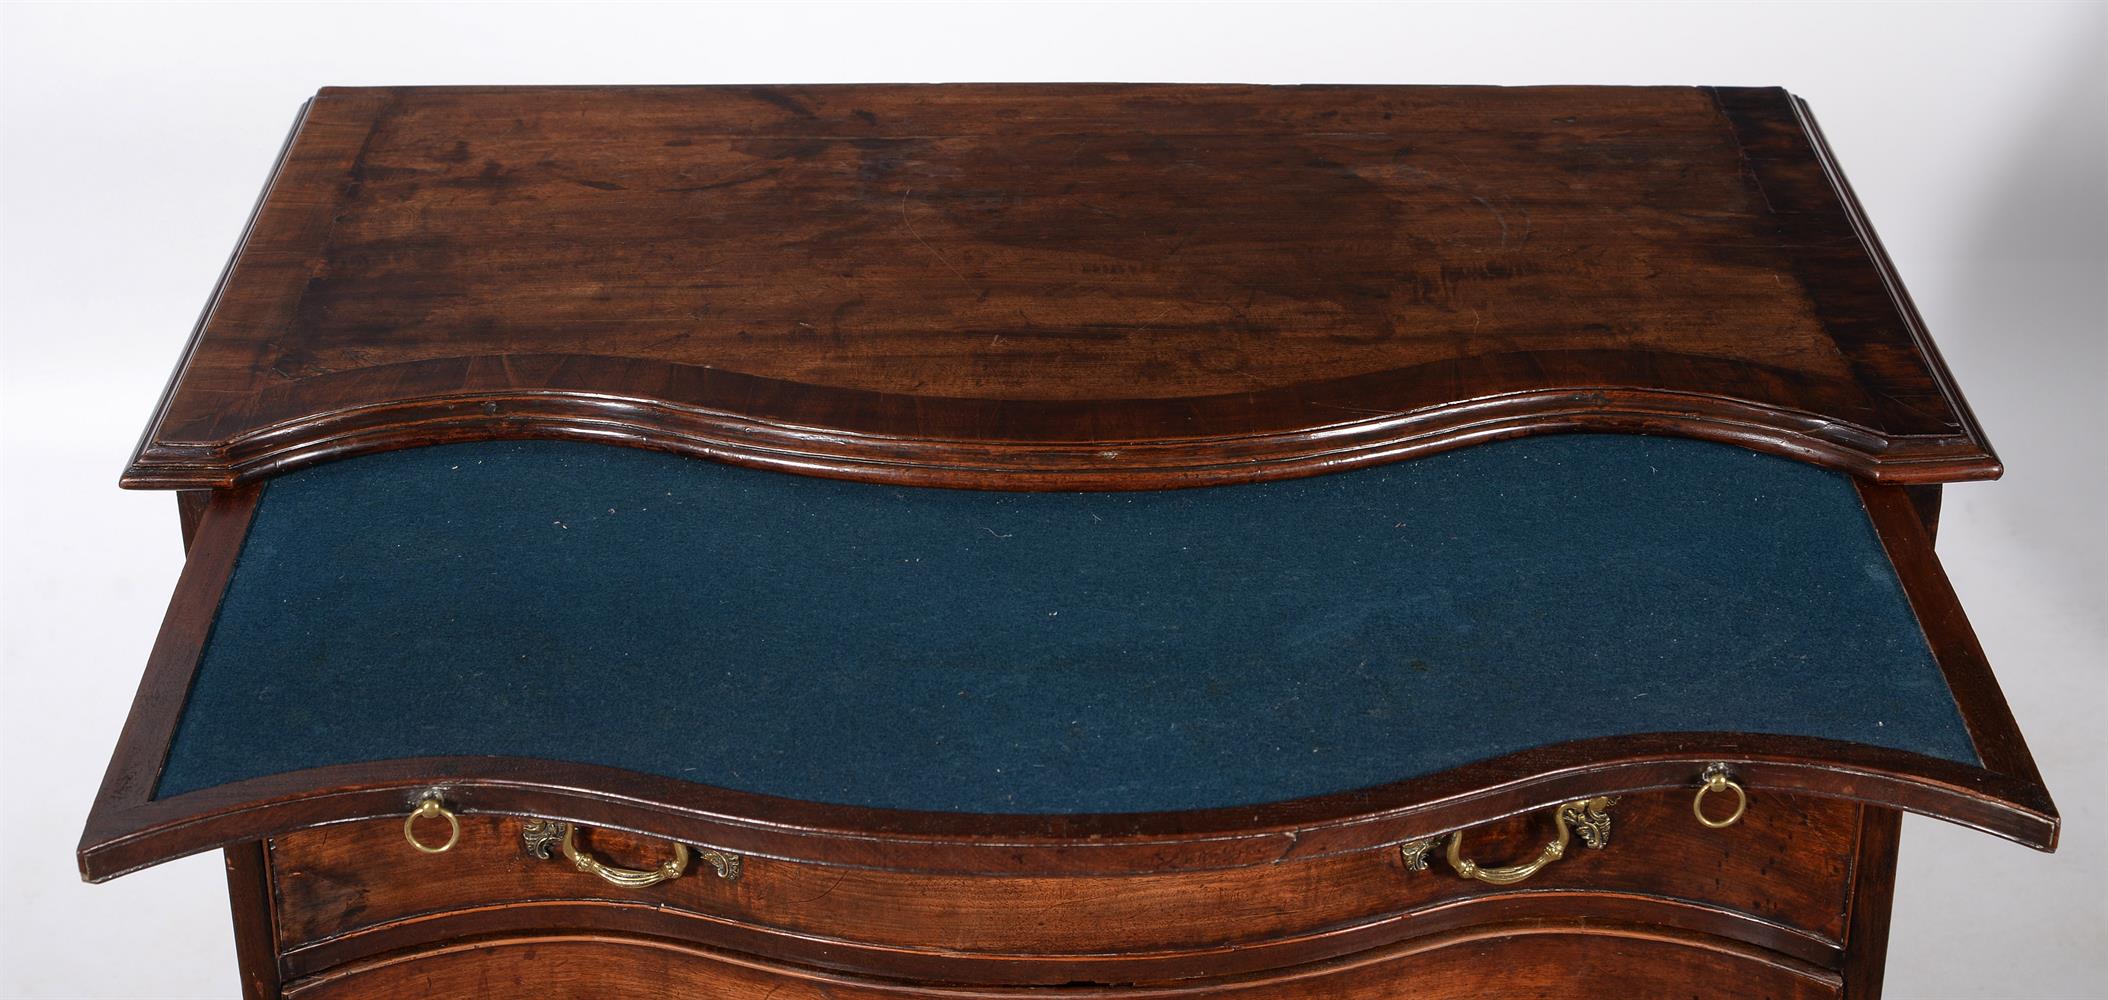 A GEORGE III MAHOGANY AND CROSSBANDED SERPENTINE FRONT COMMODE, IN THE MANNER OF THOMAS CHIPPENDALE - Image 4 of 5